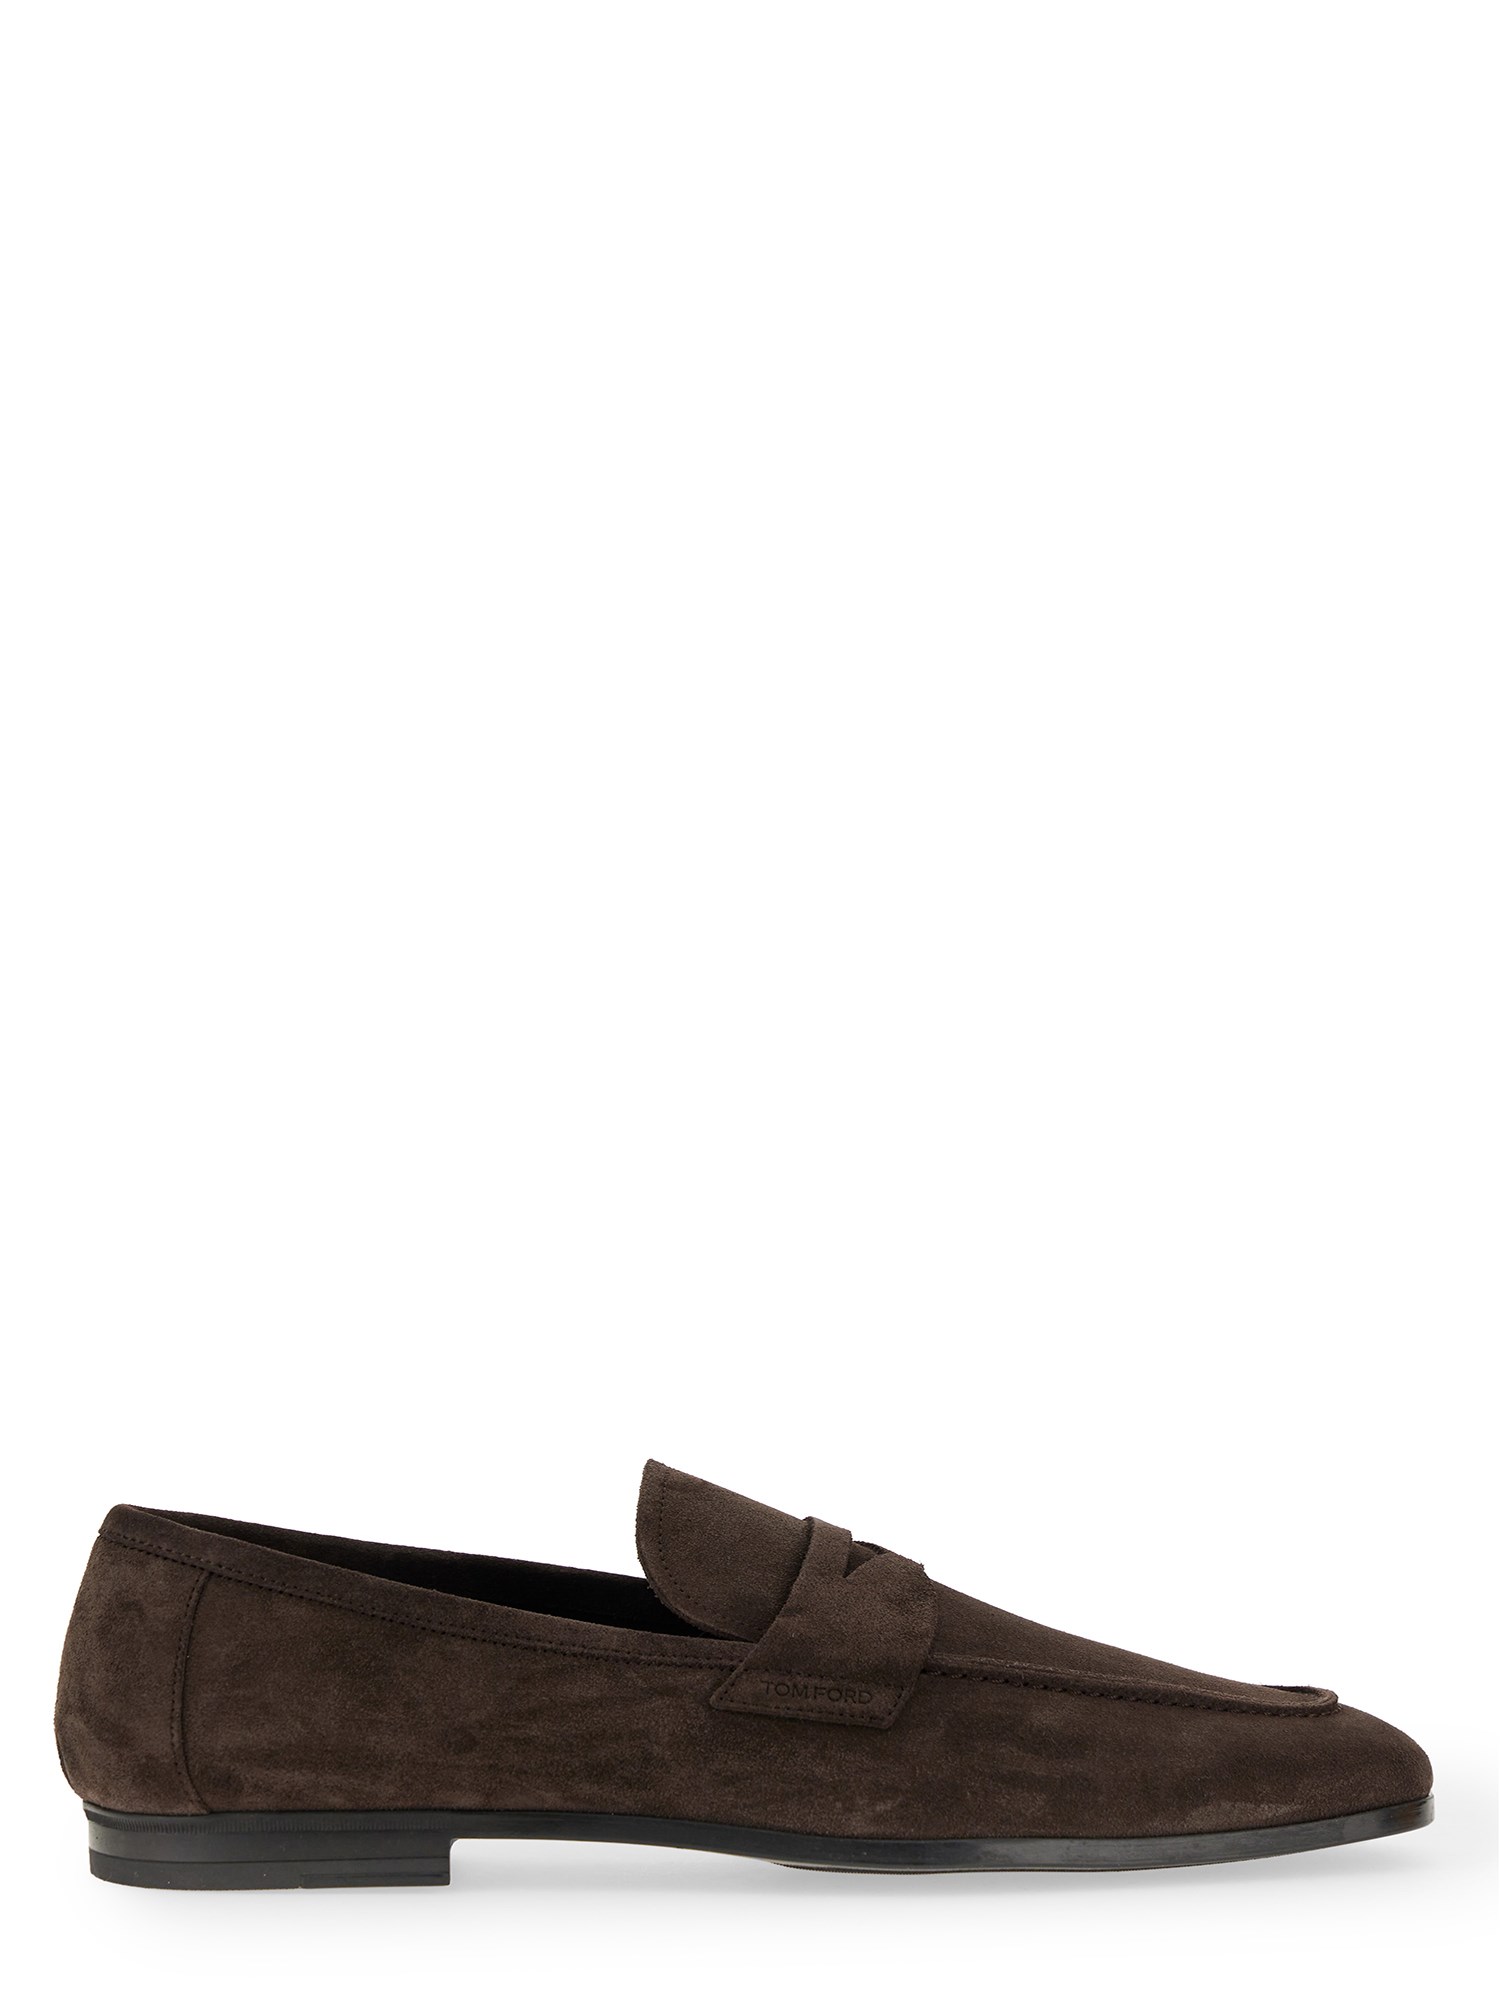 tom ford moccasin 